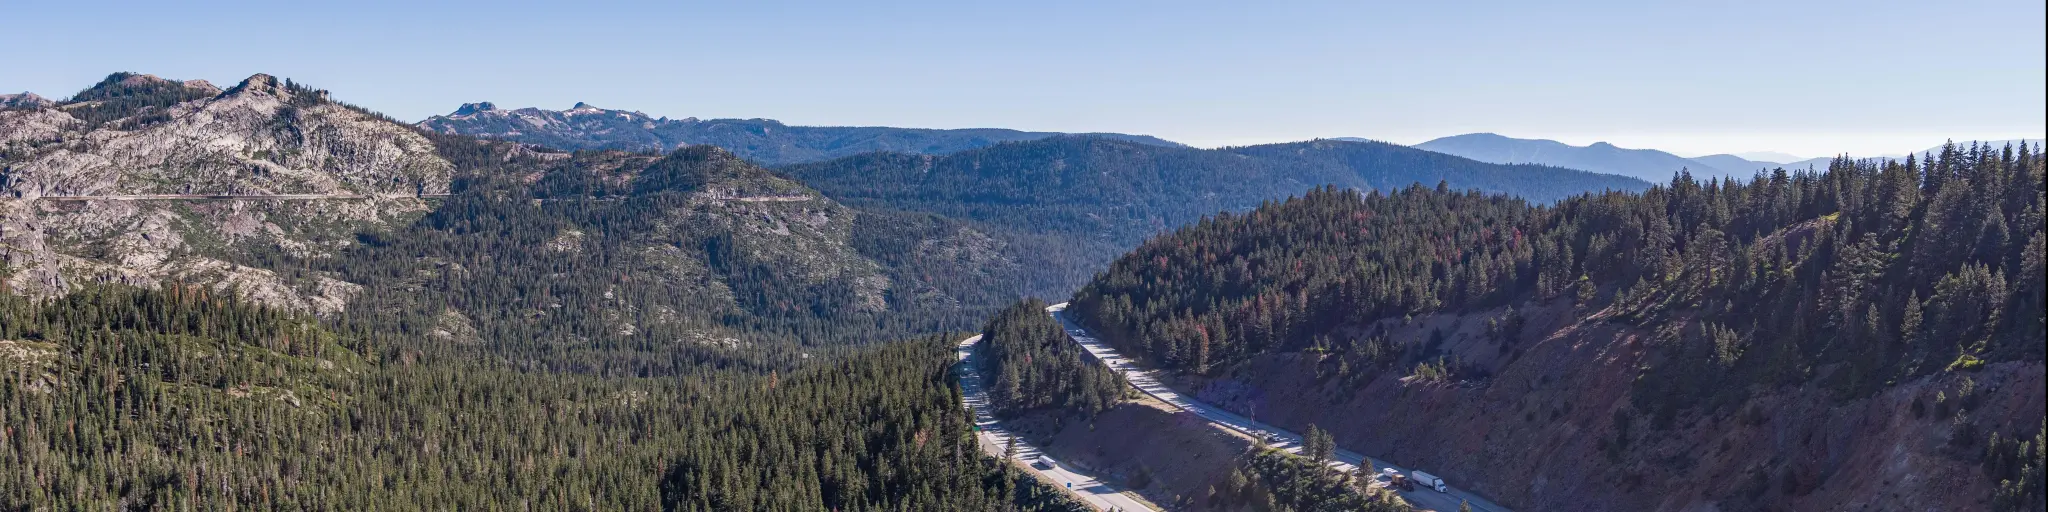 Aerial, panoramic View of I-80 cutting through the forest near Truckee California